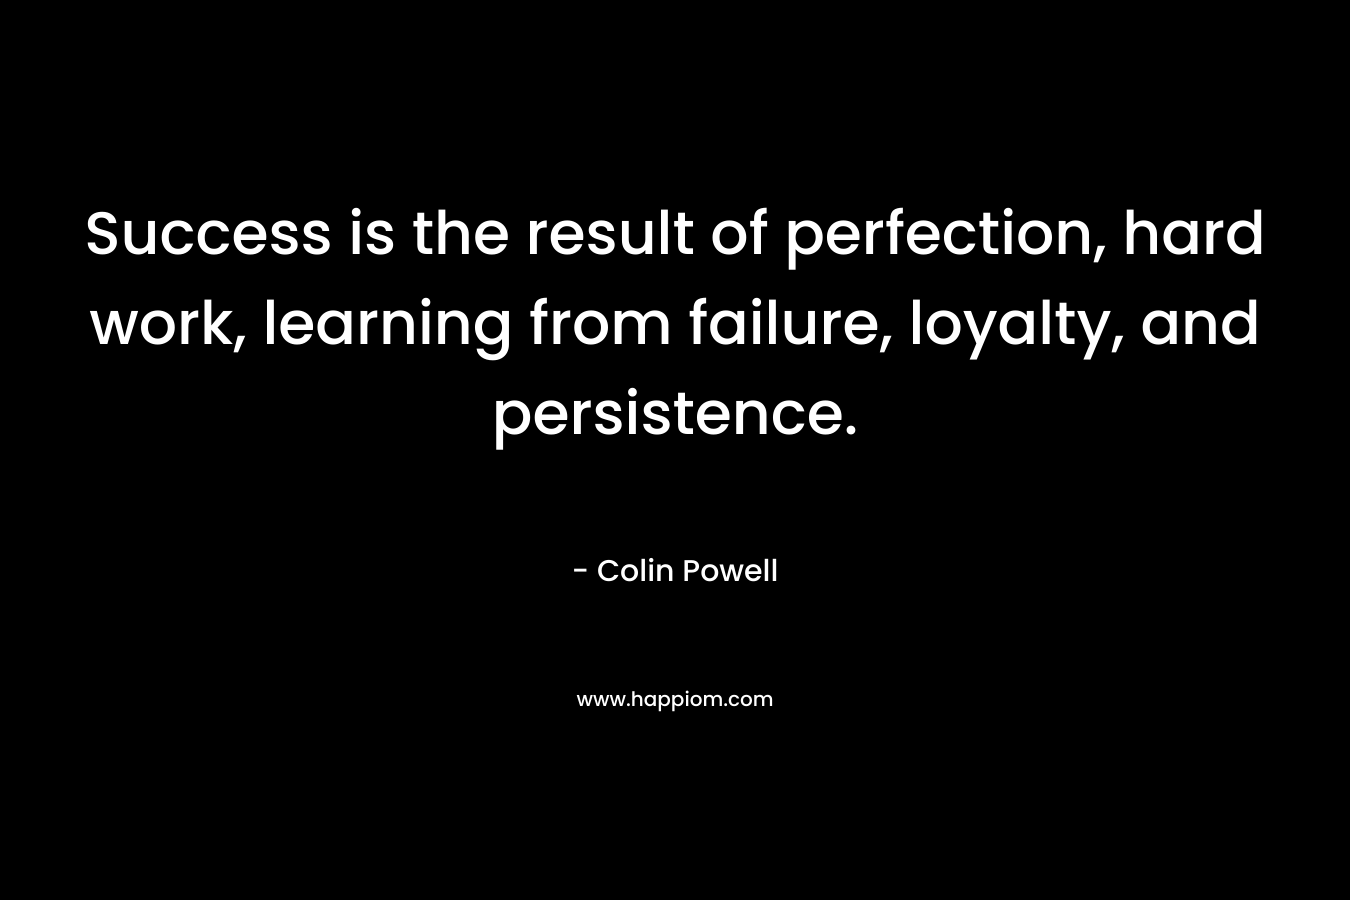 Success is the result of perfection, hard work, learning from failure, loyalty, and persistence. – Colin Powell